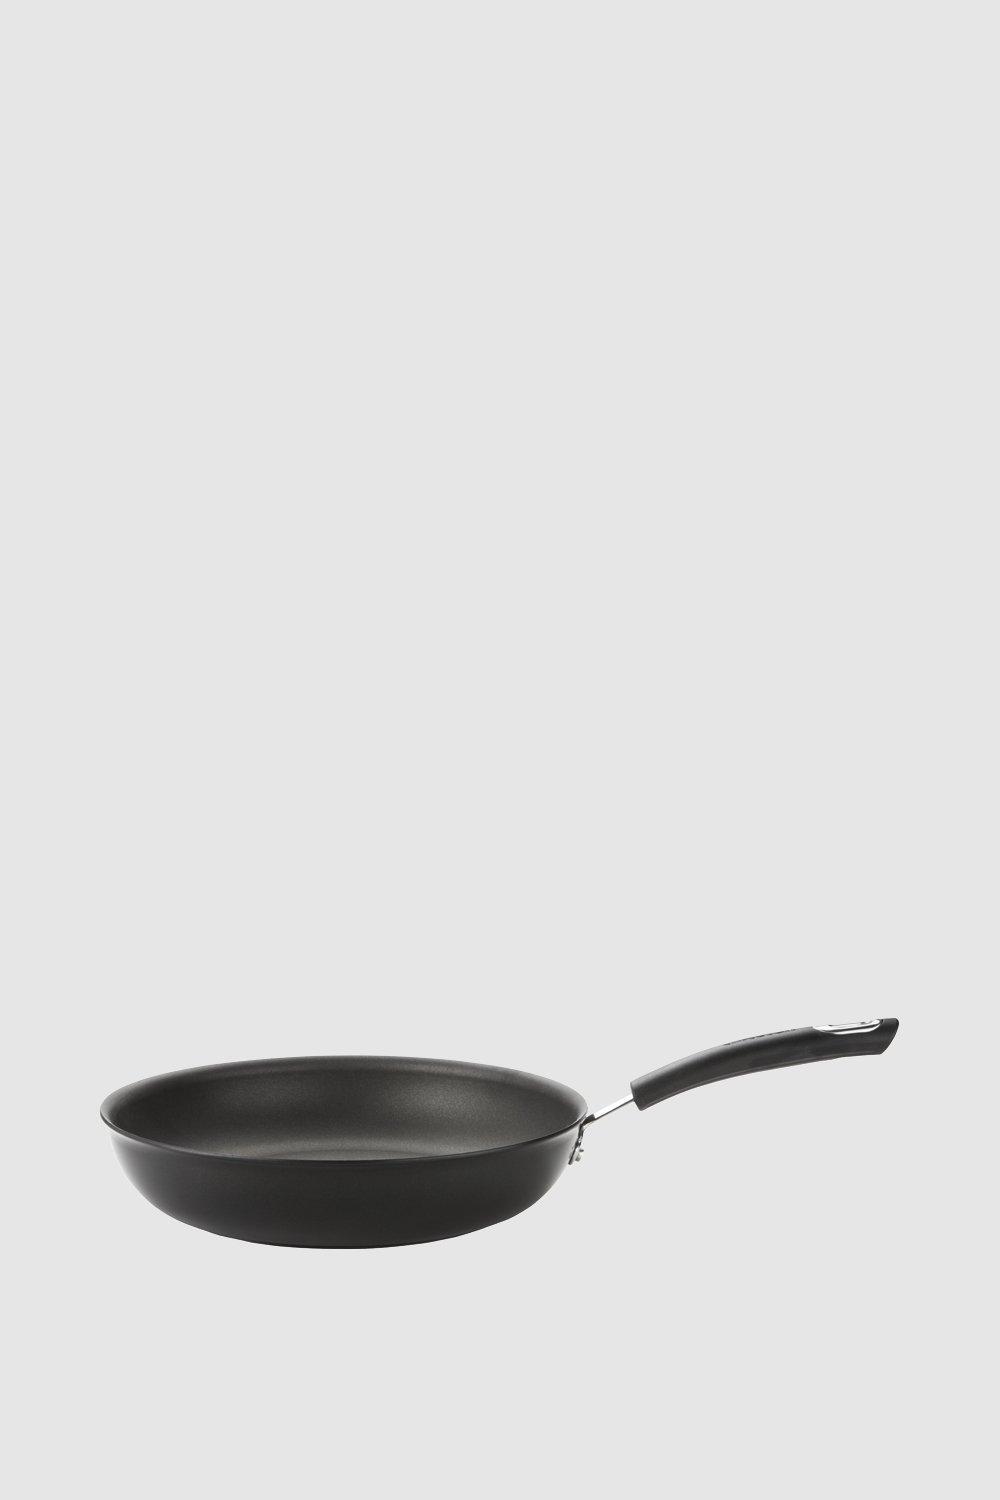 Total Frying Pan Non Stick Induction Hob, Large 31cm, Durable Hard Anodised Aluminium